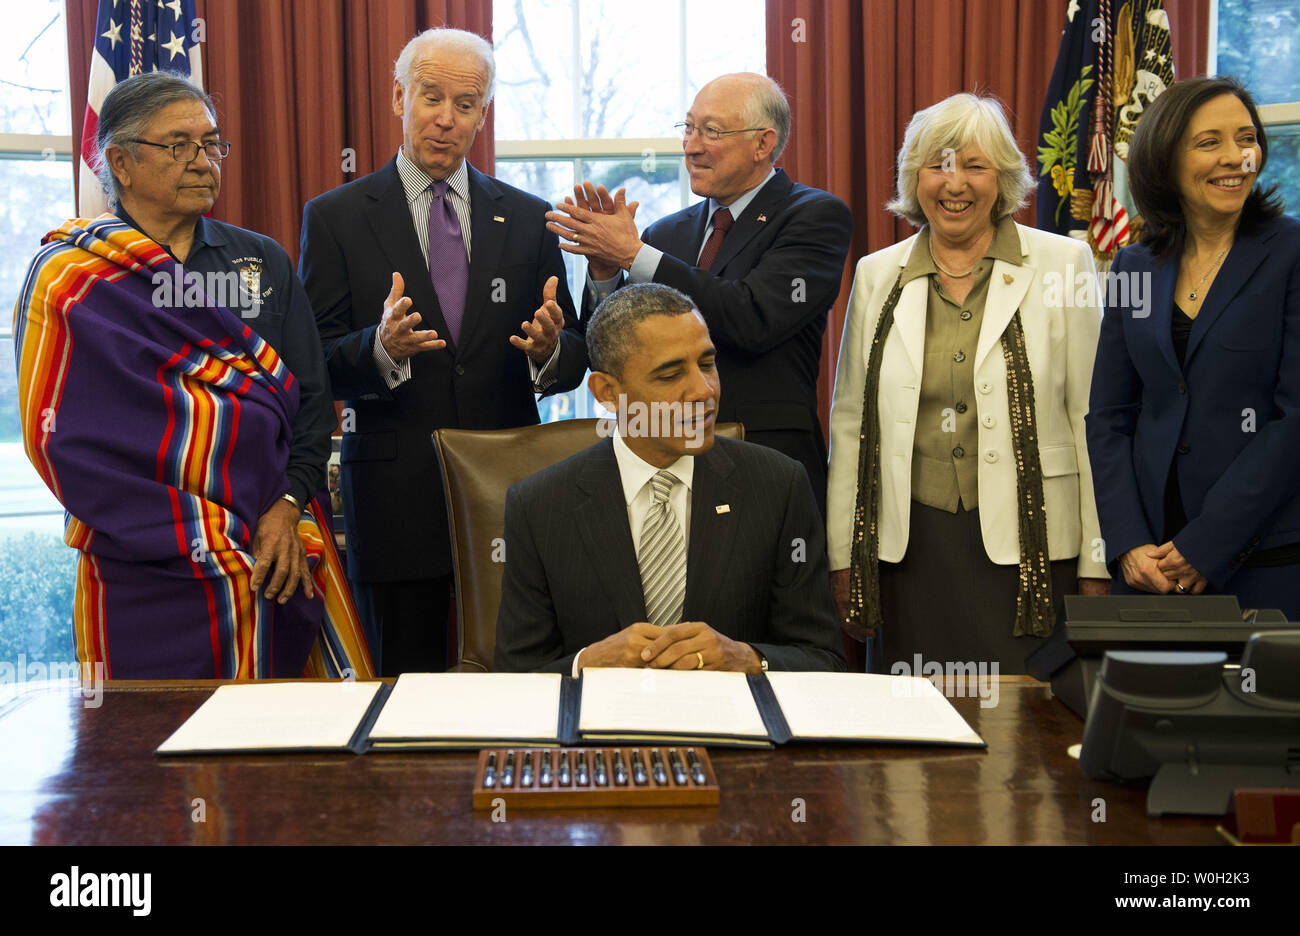 Vice President Joe Biden (2nd-L) jesters as he stands next to Interior Secretary Ken Salazar, prior to President Barack Obama signing a bill designating the First State Monument, in Delaware, a National Monument, during a bill signing ceremony in the Oval Office at the White House on March 25, 2013 in Washington, D.C. President Obama signed a series of bills designating five new National Monuments, including, Rio Grande del Norte, in New Mexico, the First State Monument in Delaware, the Harriet Tubman Underground Railroad in Maryland, the Charles Young Buffalo Soldiers in Ohio and the San Juan Stock Photo